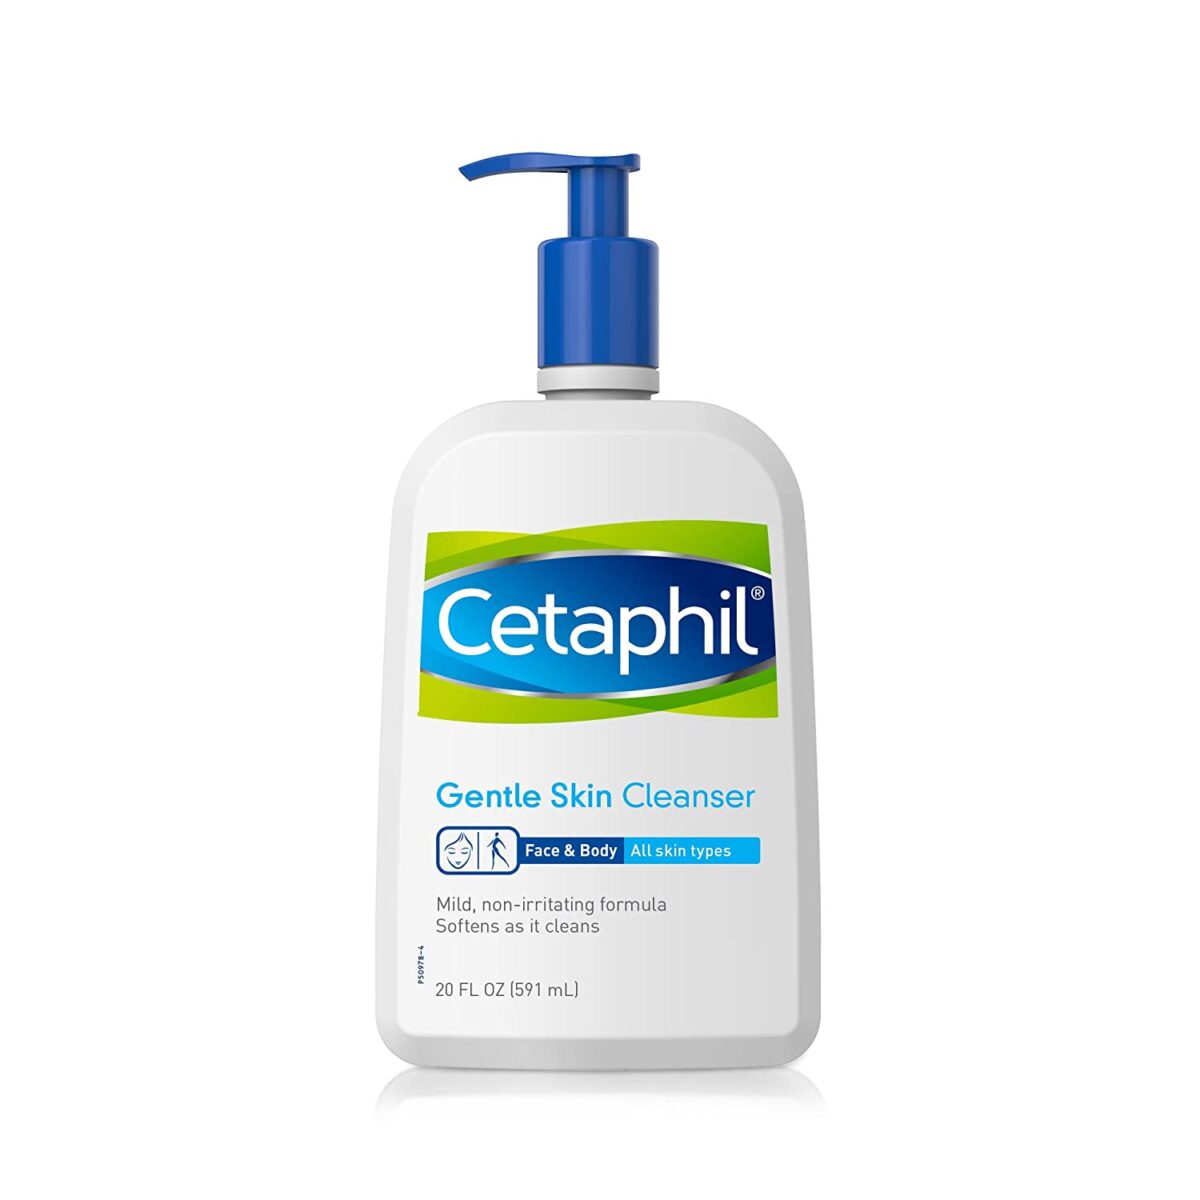 Cetaphil Gentle Skin Cleanser 20 Fl Oz, Hydrating Face Wash & Body Wash, Ideal for Sensitive, Dry Skin, Soap Free